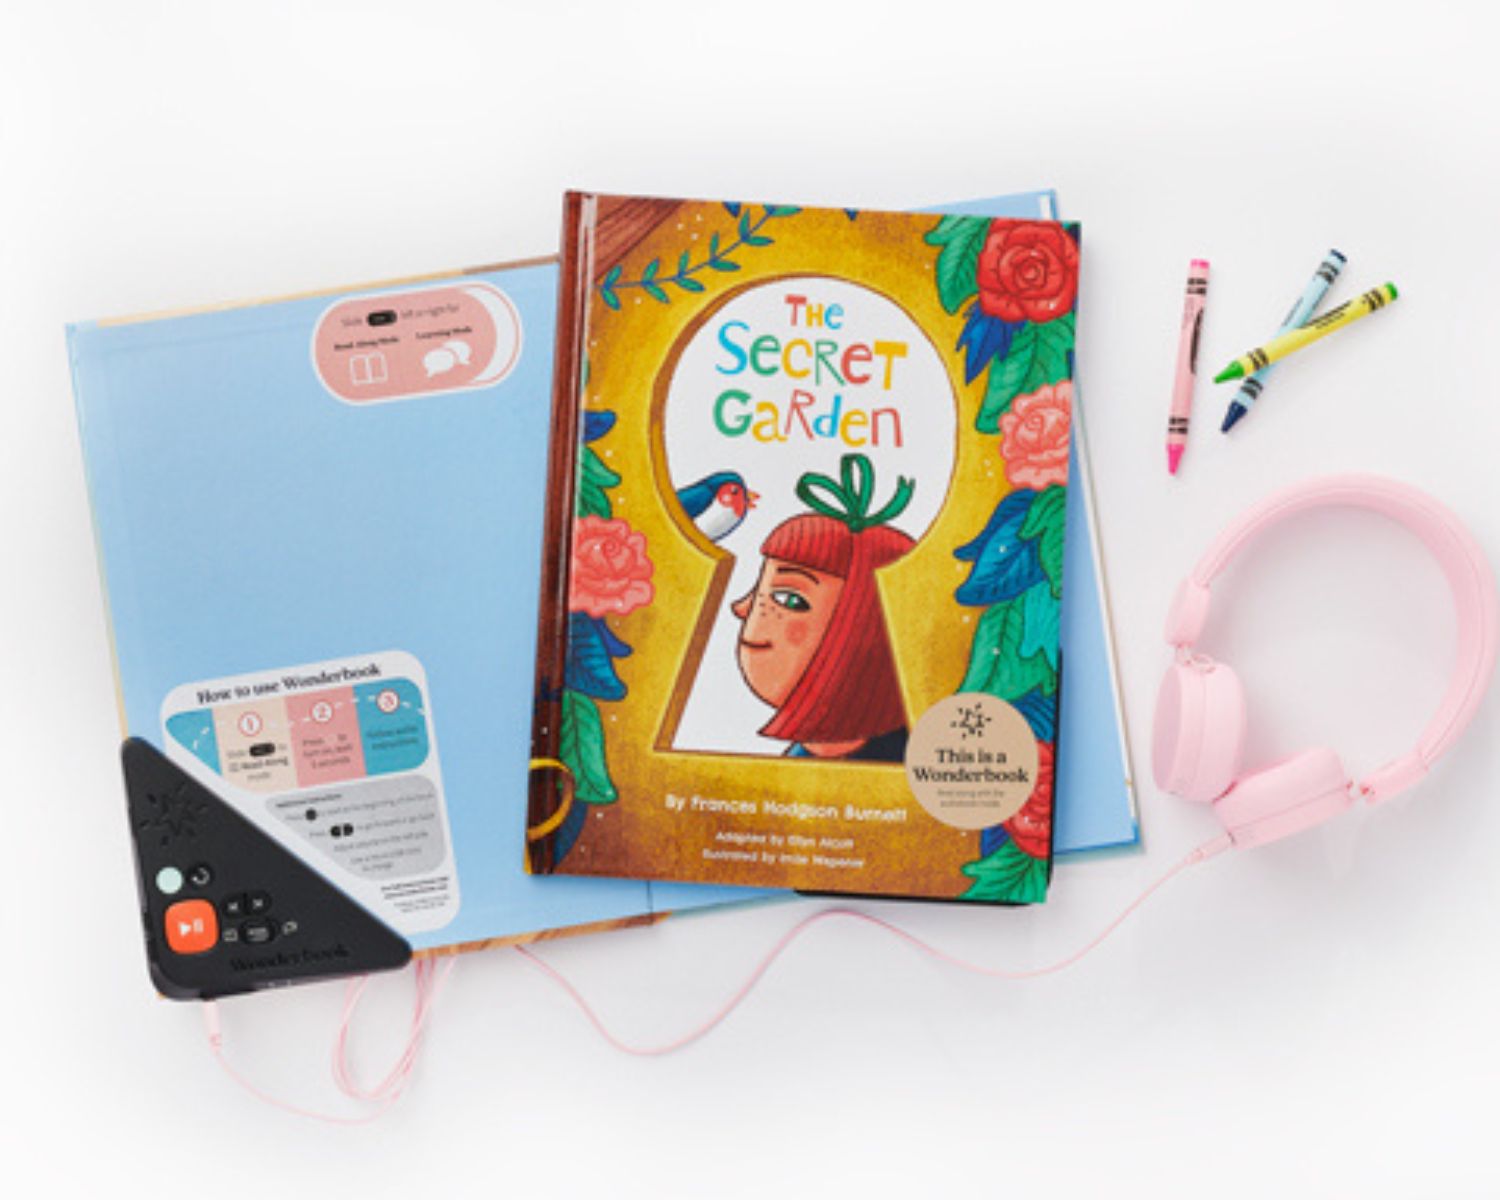 An image of a wonderbook with a children's story, headphones and crayons